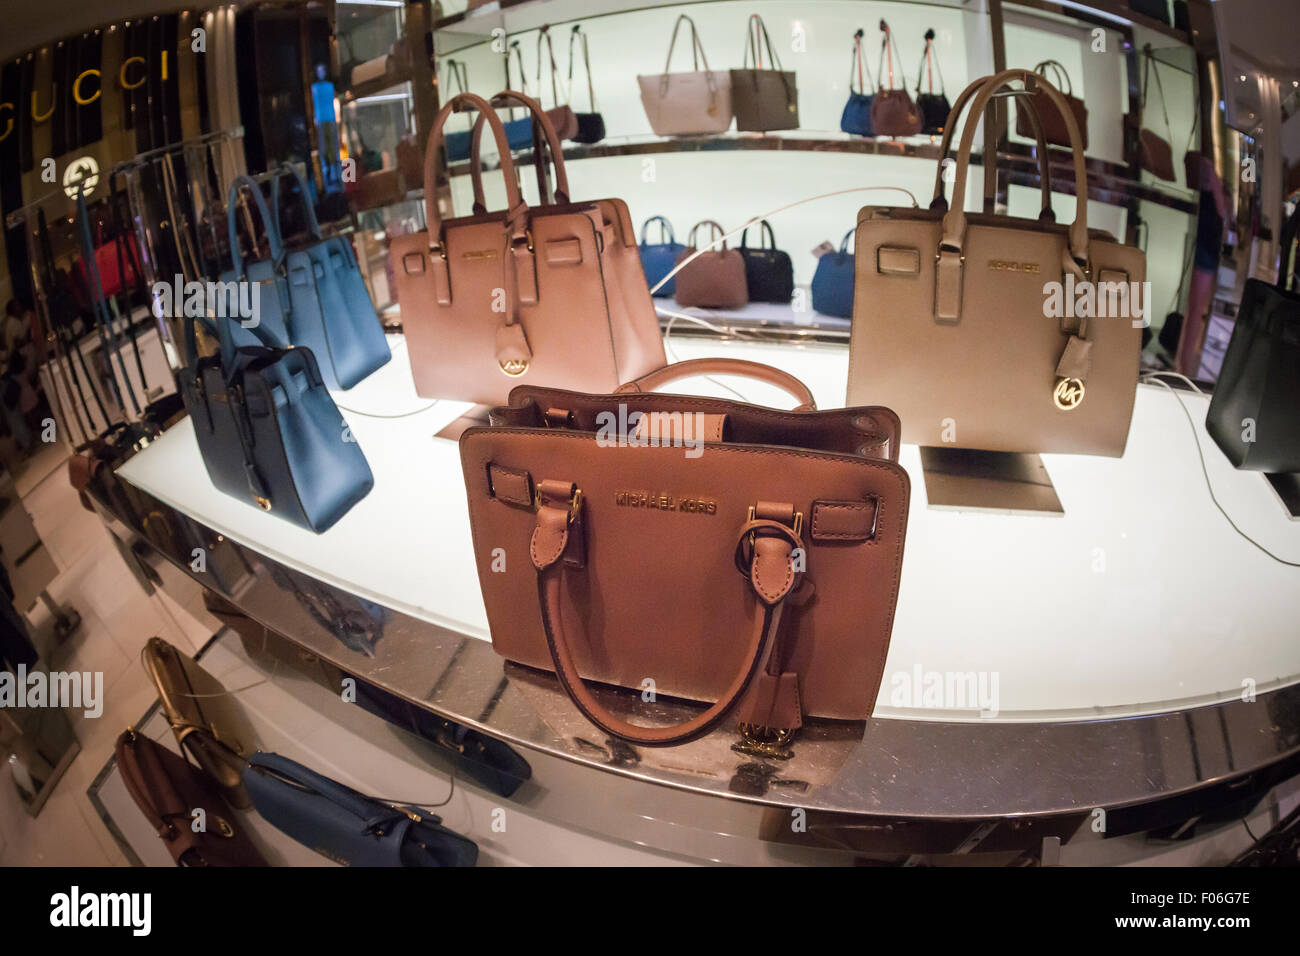 Handbags on display at the Michael Kors boutique within Macy's in New York  on Tuesday, August 4, 2015. First-quarter sales and profits for Michael Kors  handbag designer beat analysts' expectations, albeit low,